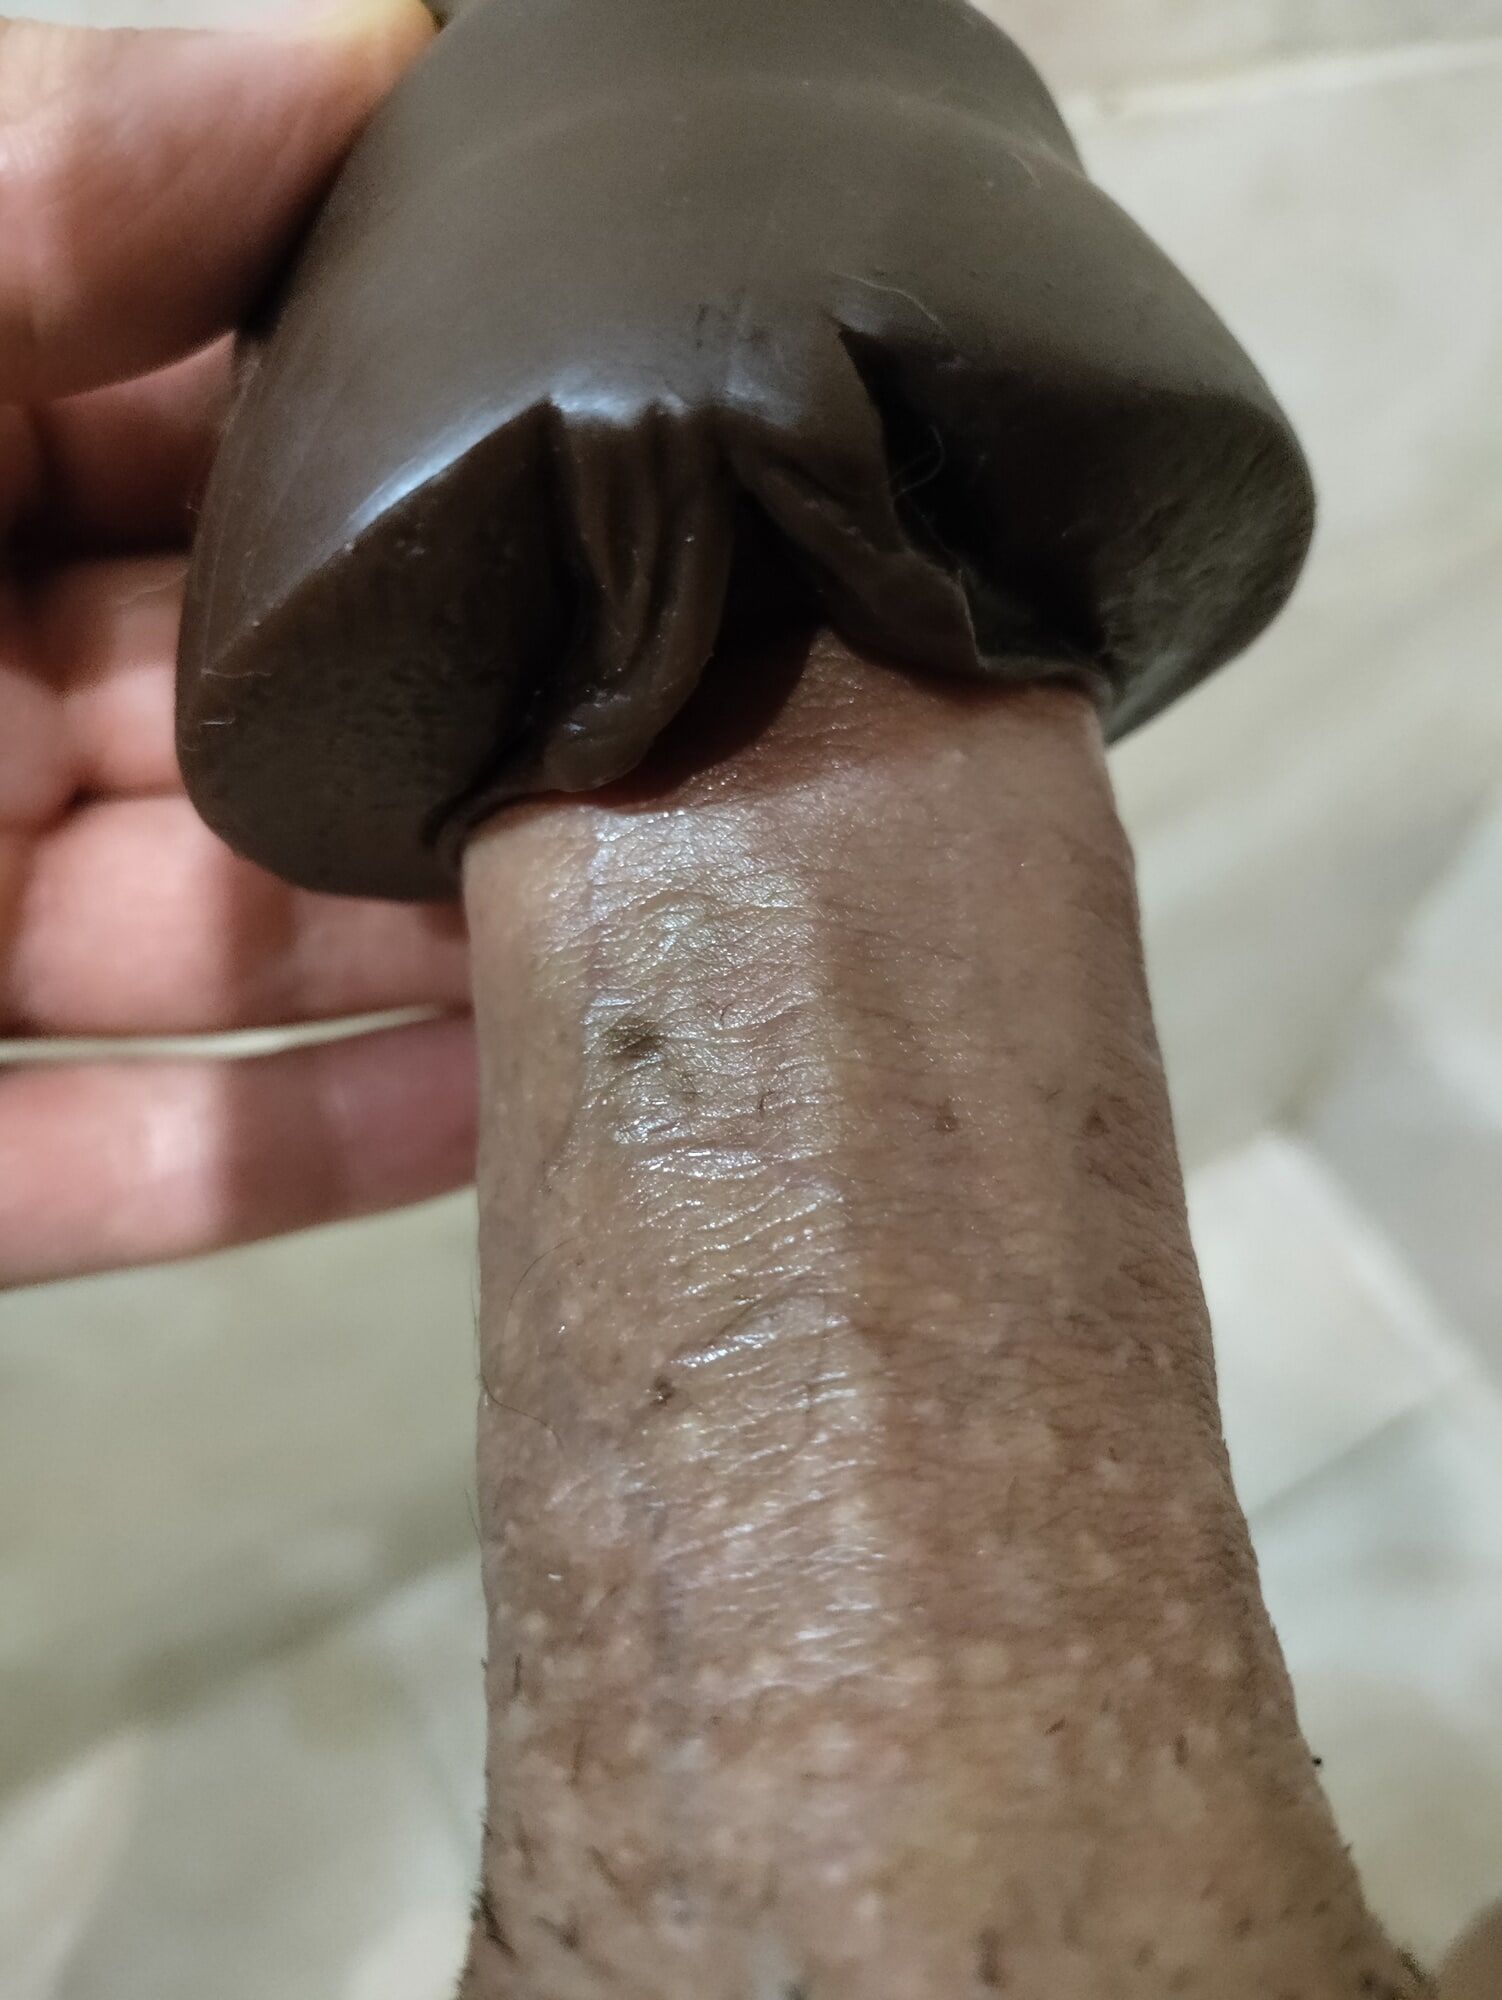 Dick in sex toy